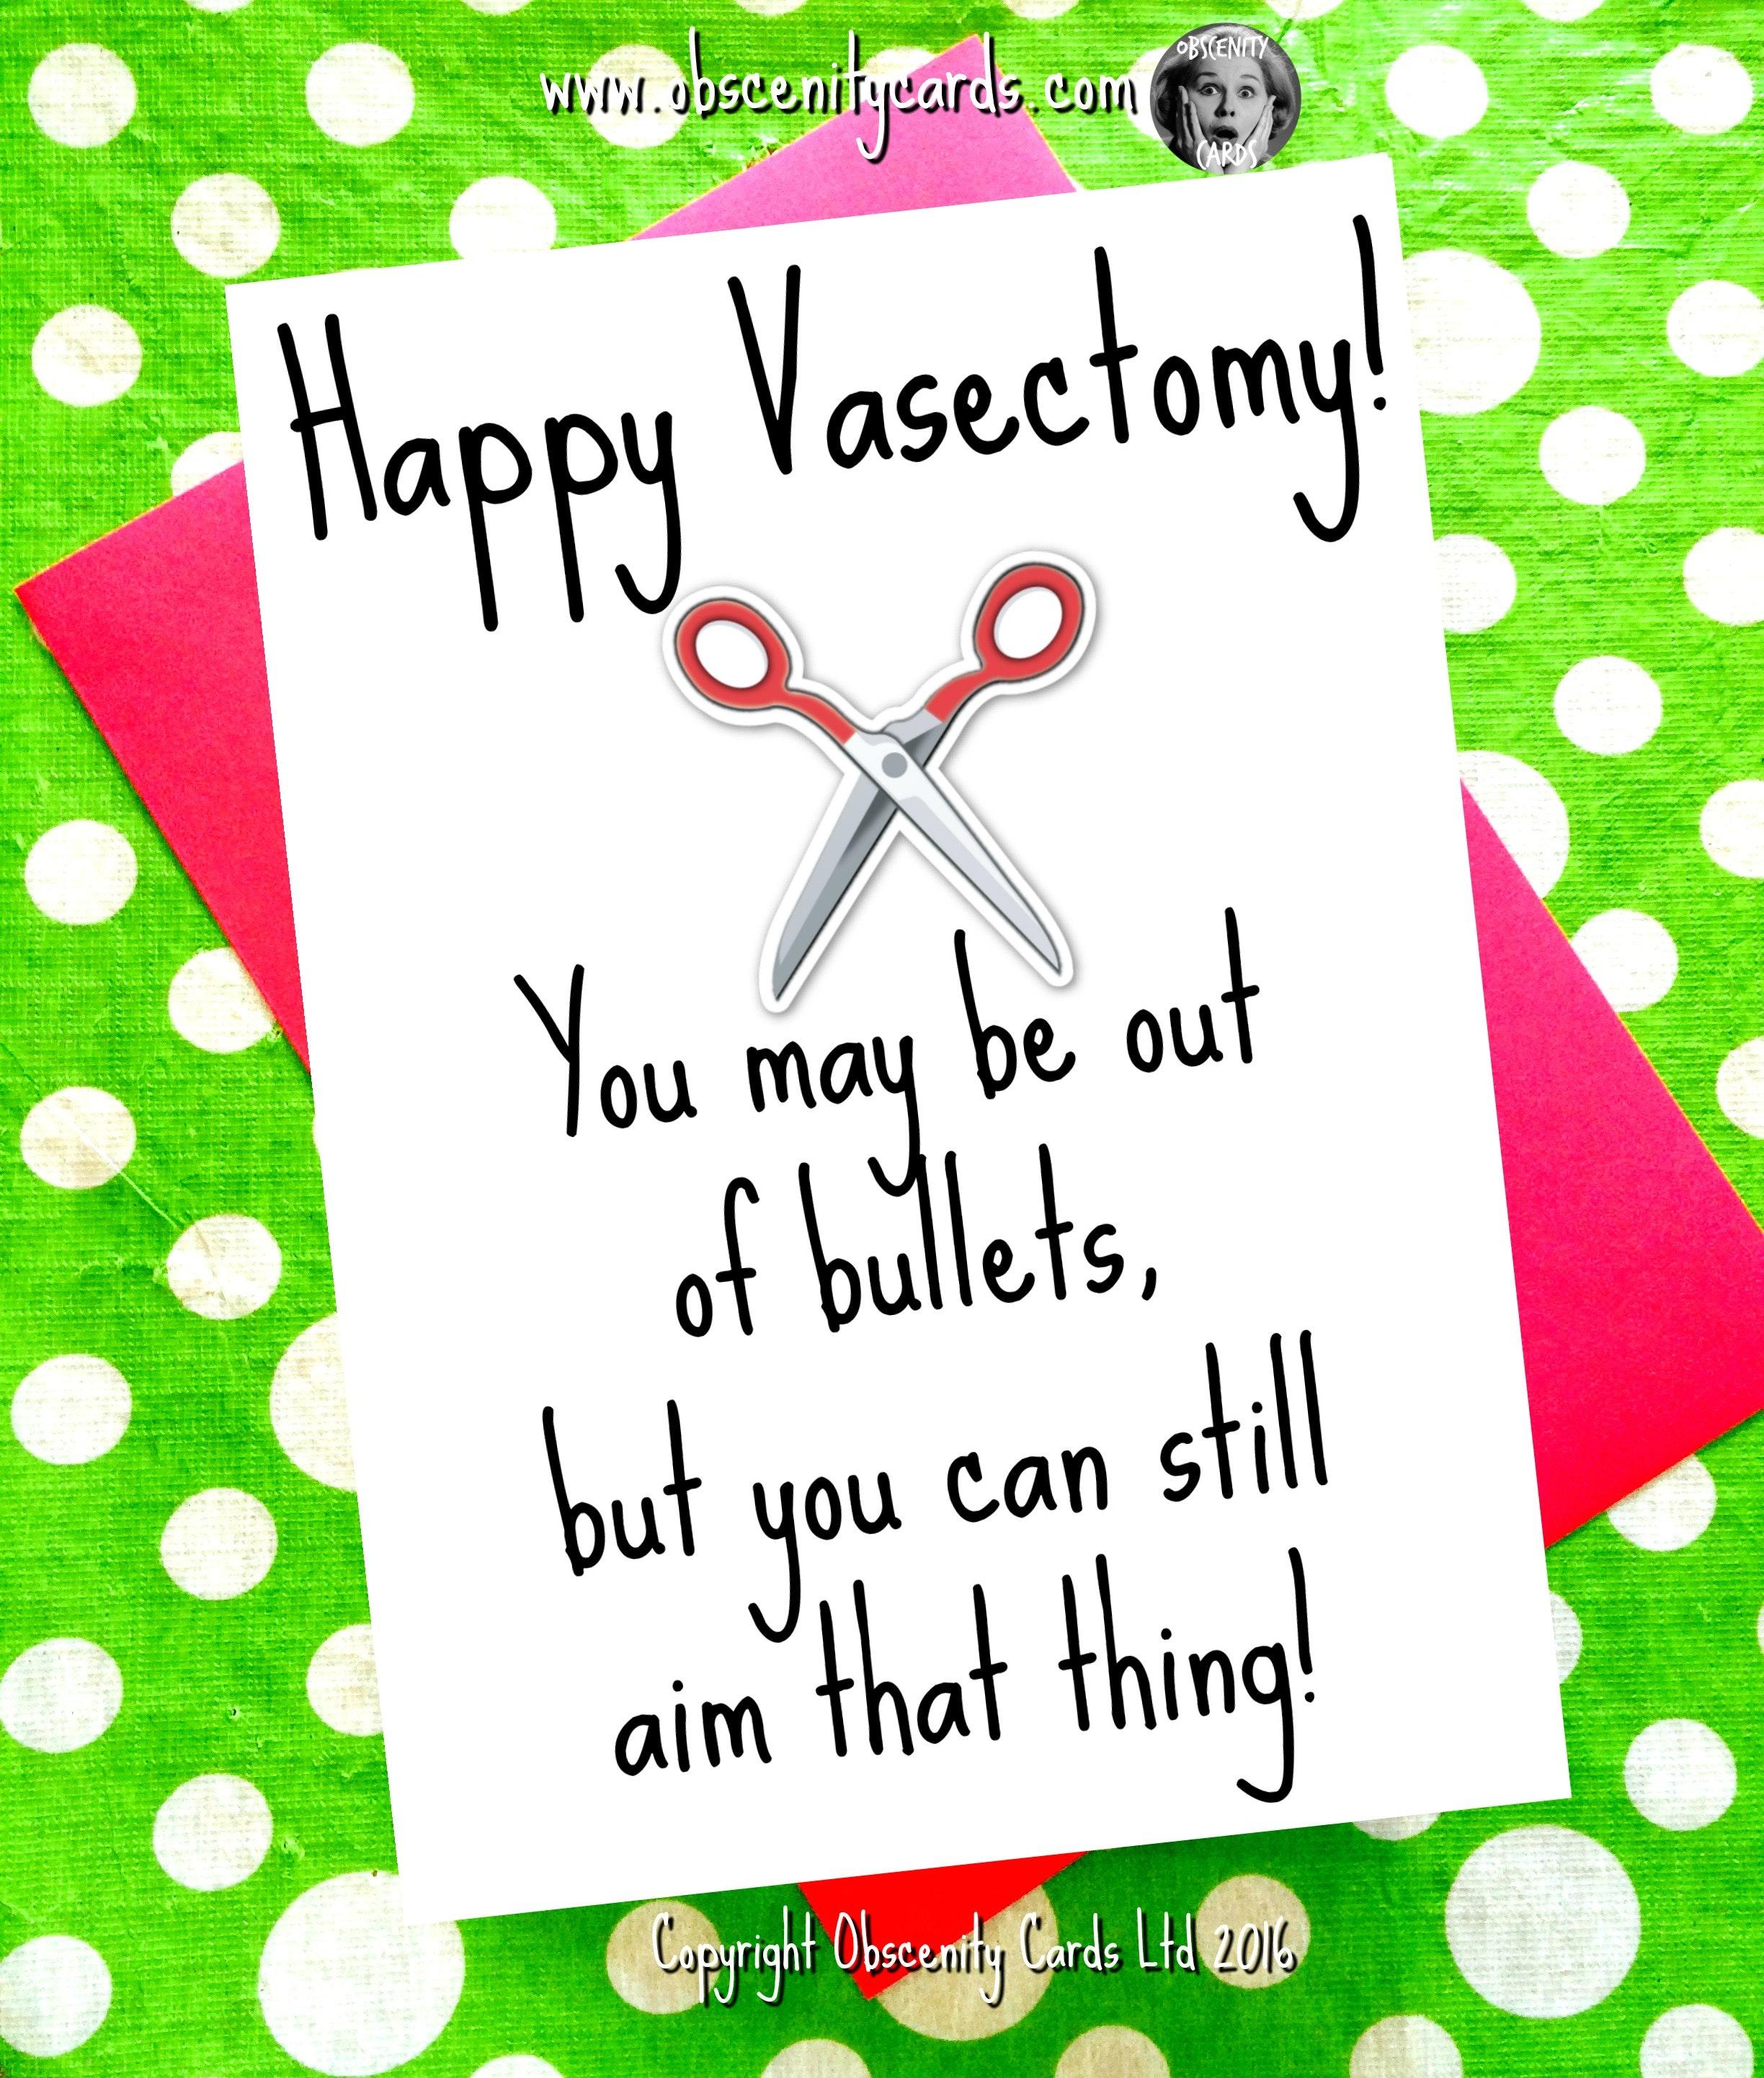 funny-vasectomy-card-you-may-be-out-of-bullets-but-you-can-still-aim